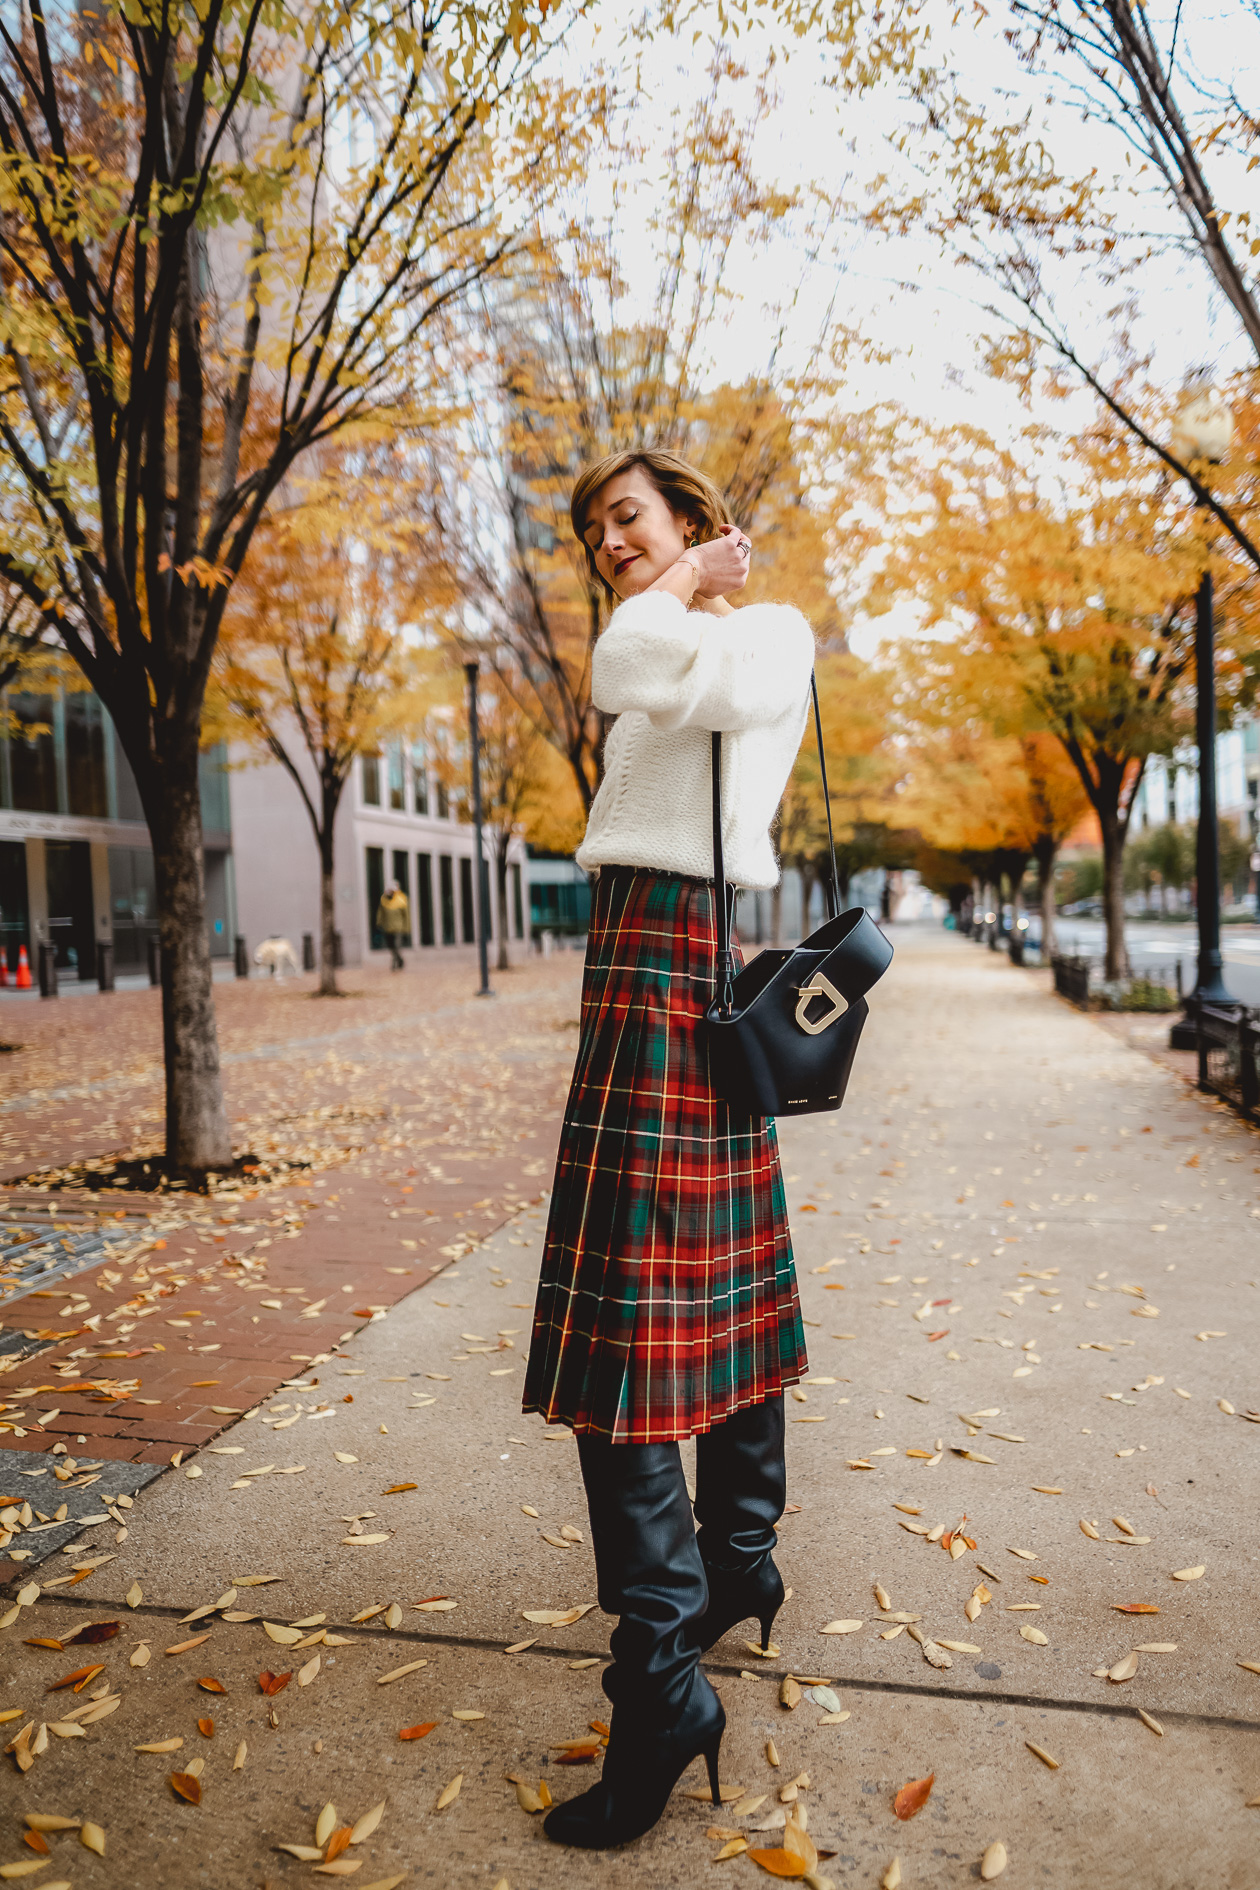 & Other Stories sweater and tartan skirt